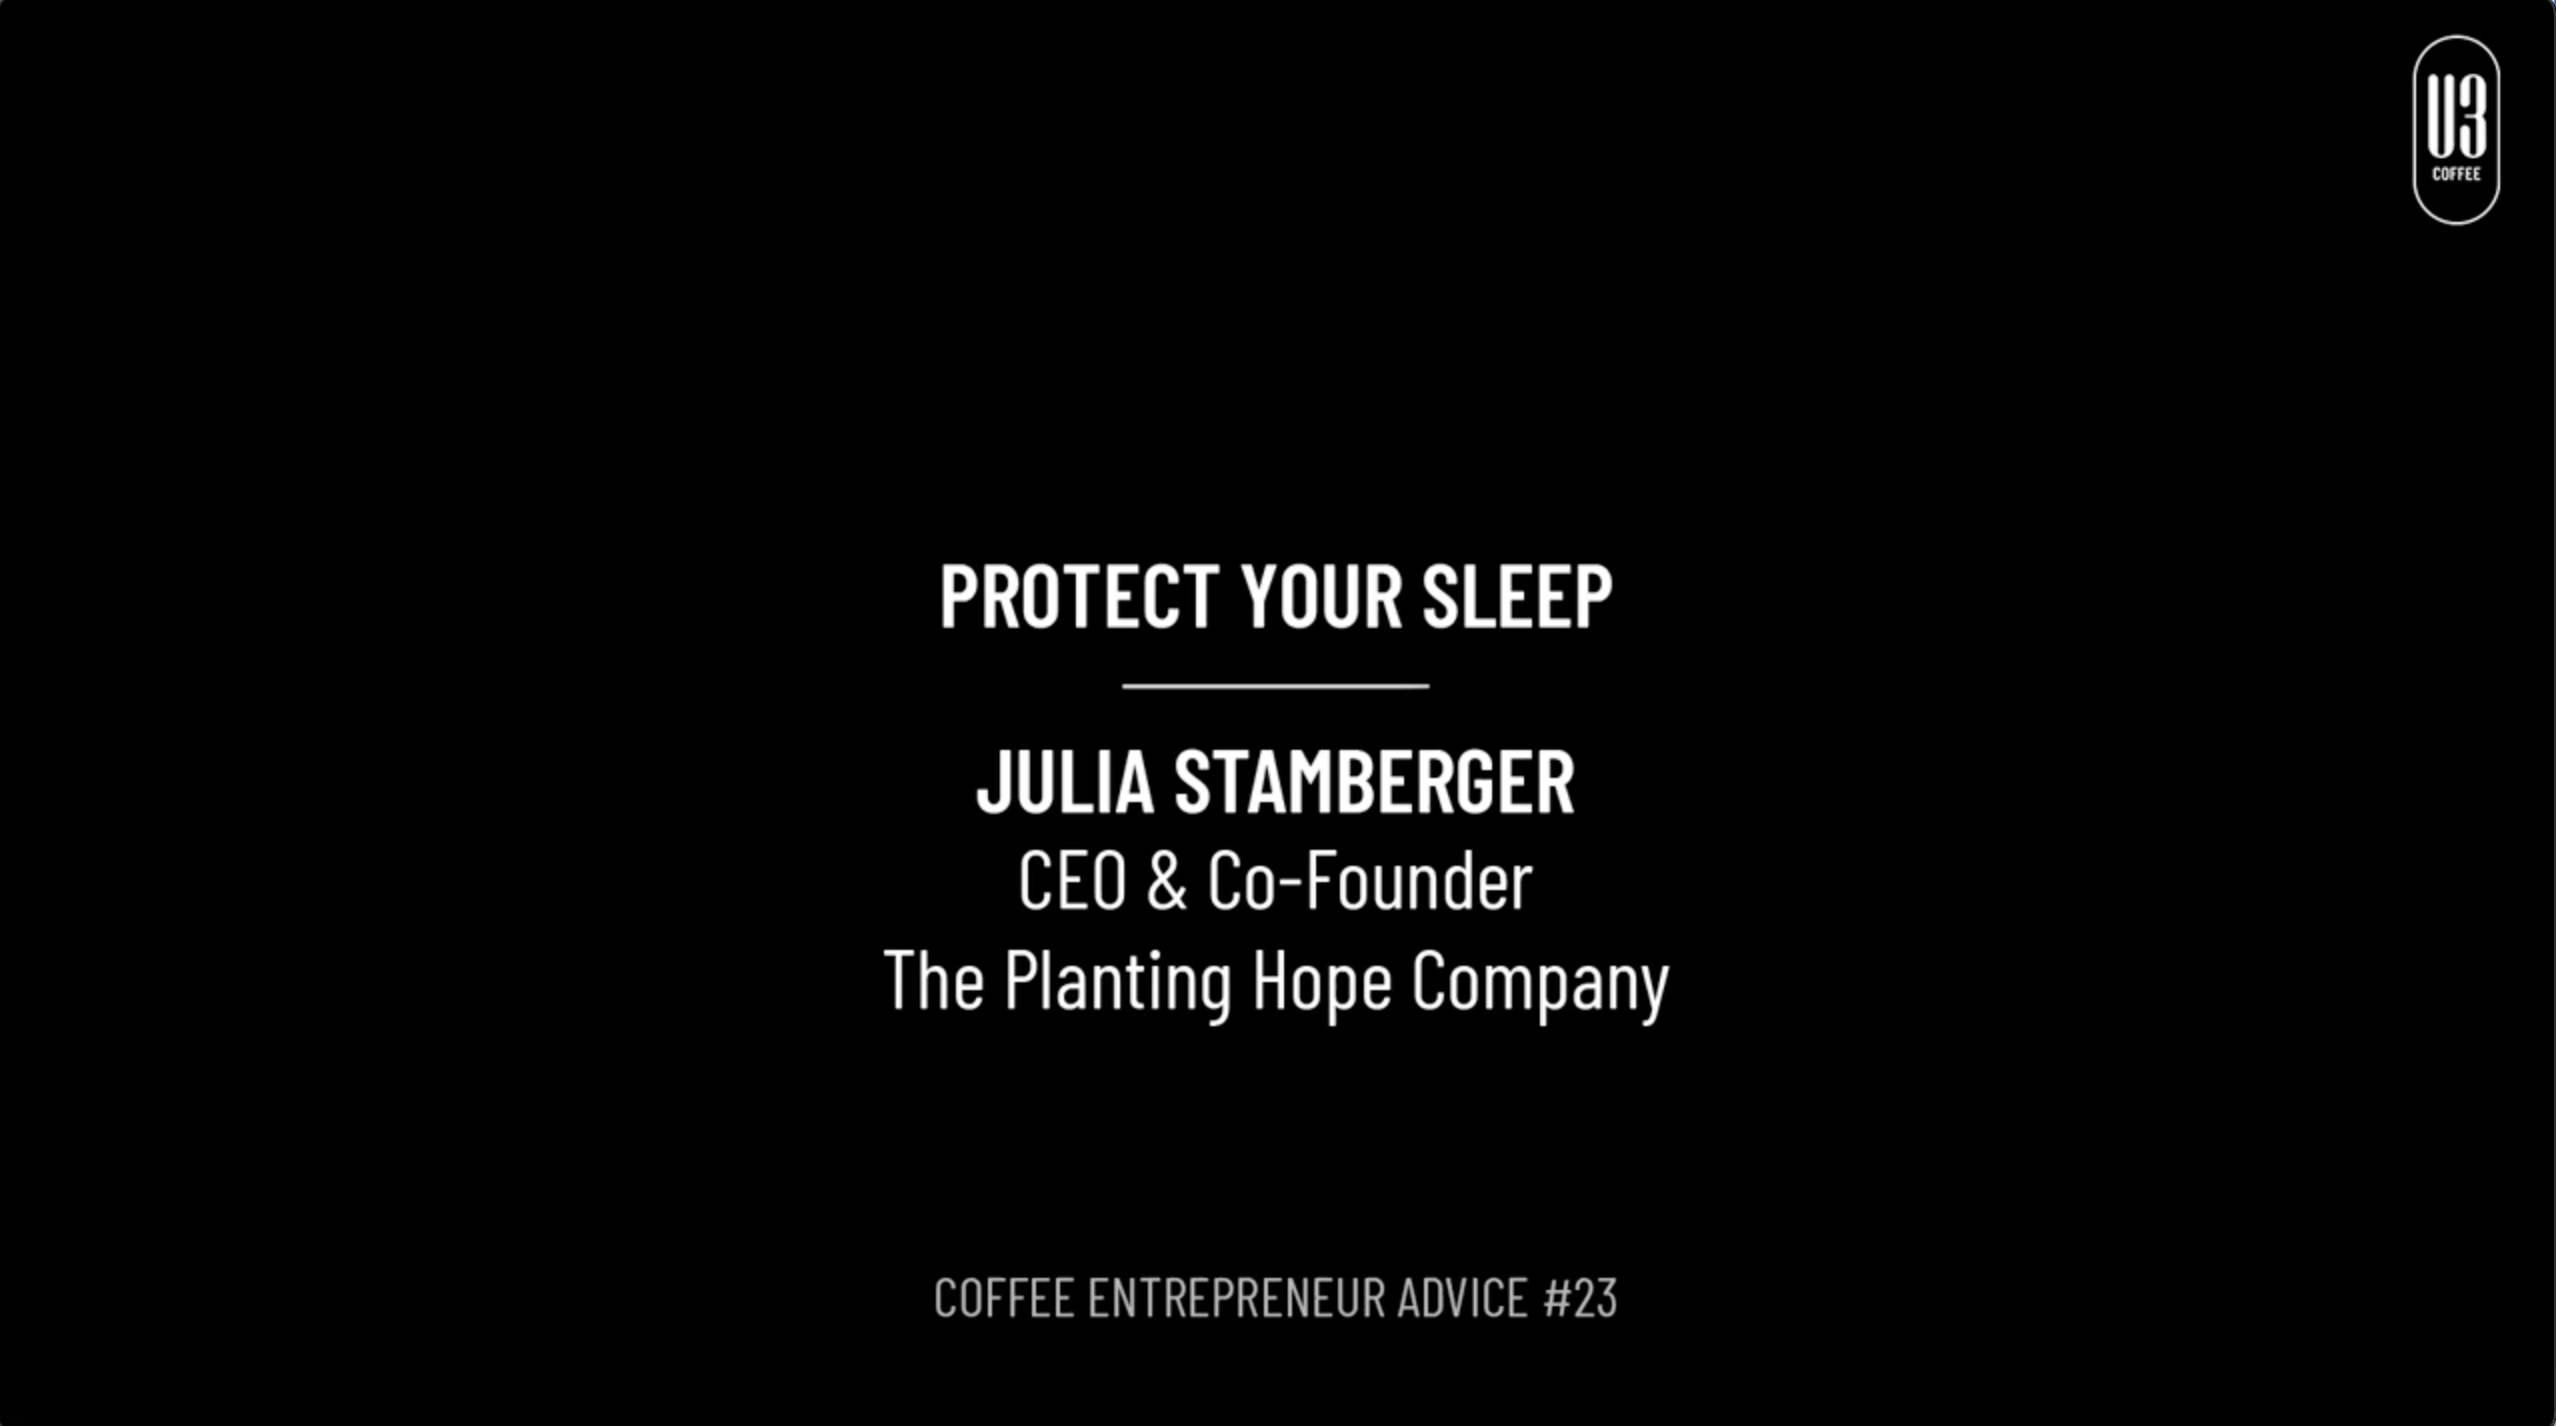 Julia Stamberger, CEO & Co-Founder of The Planting Hope Company gives her advice on protecting your sleep.